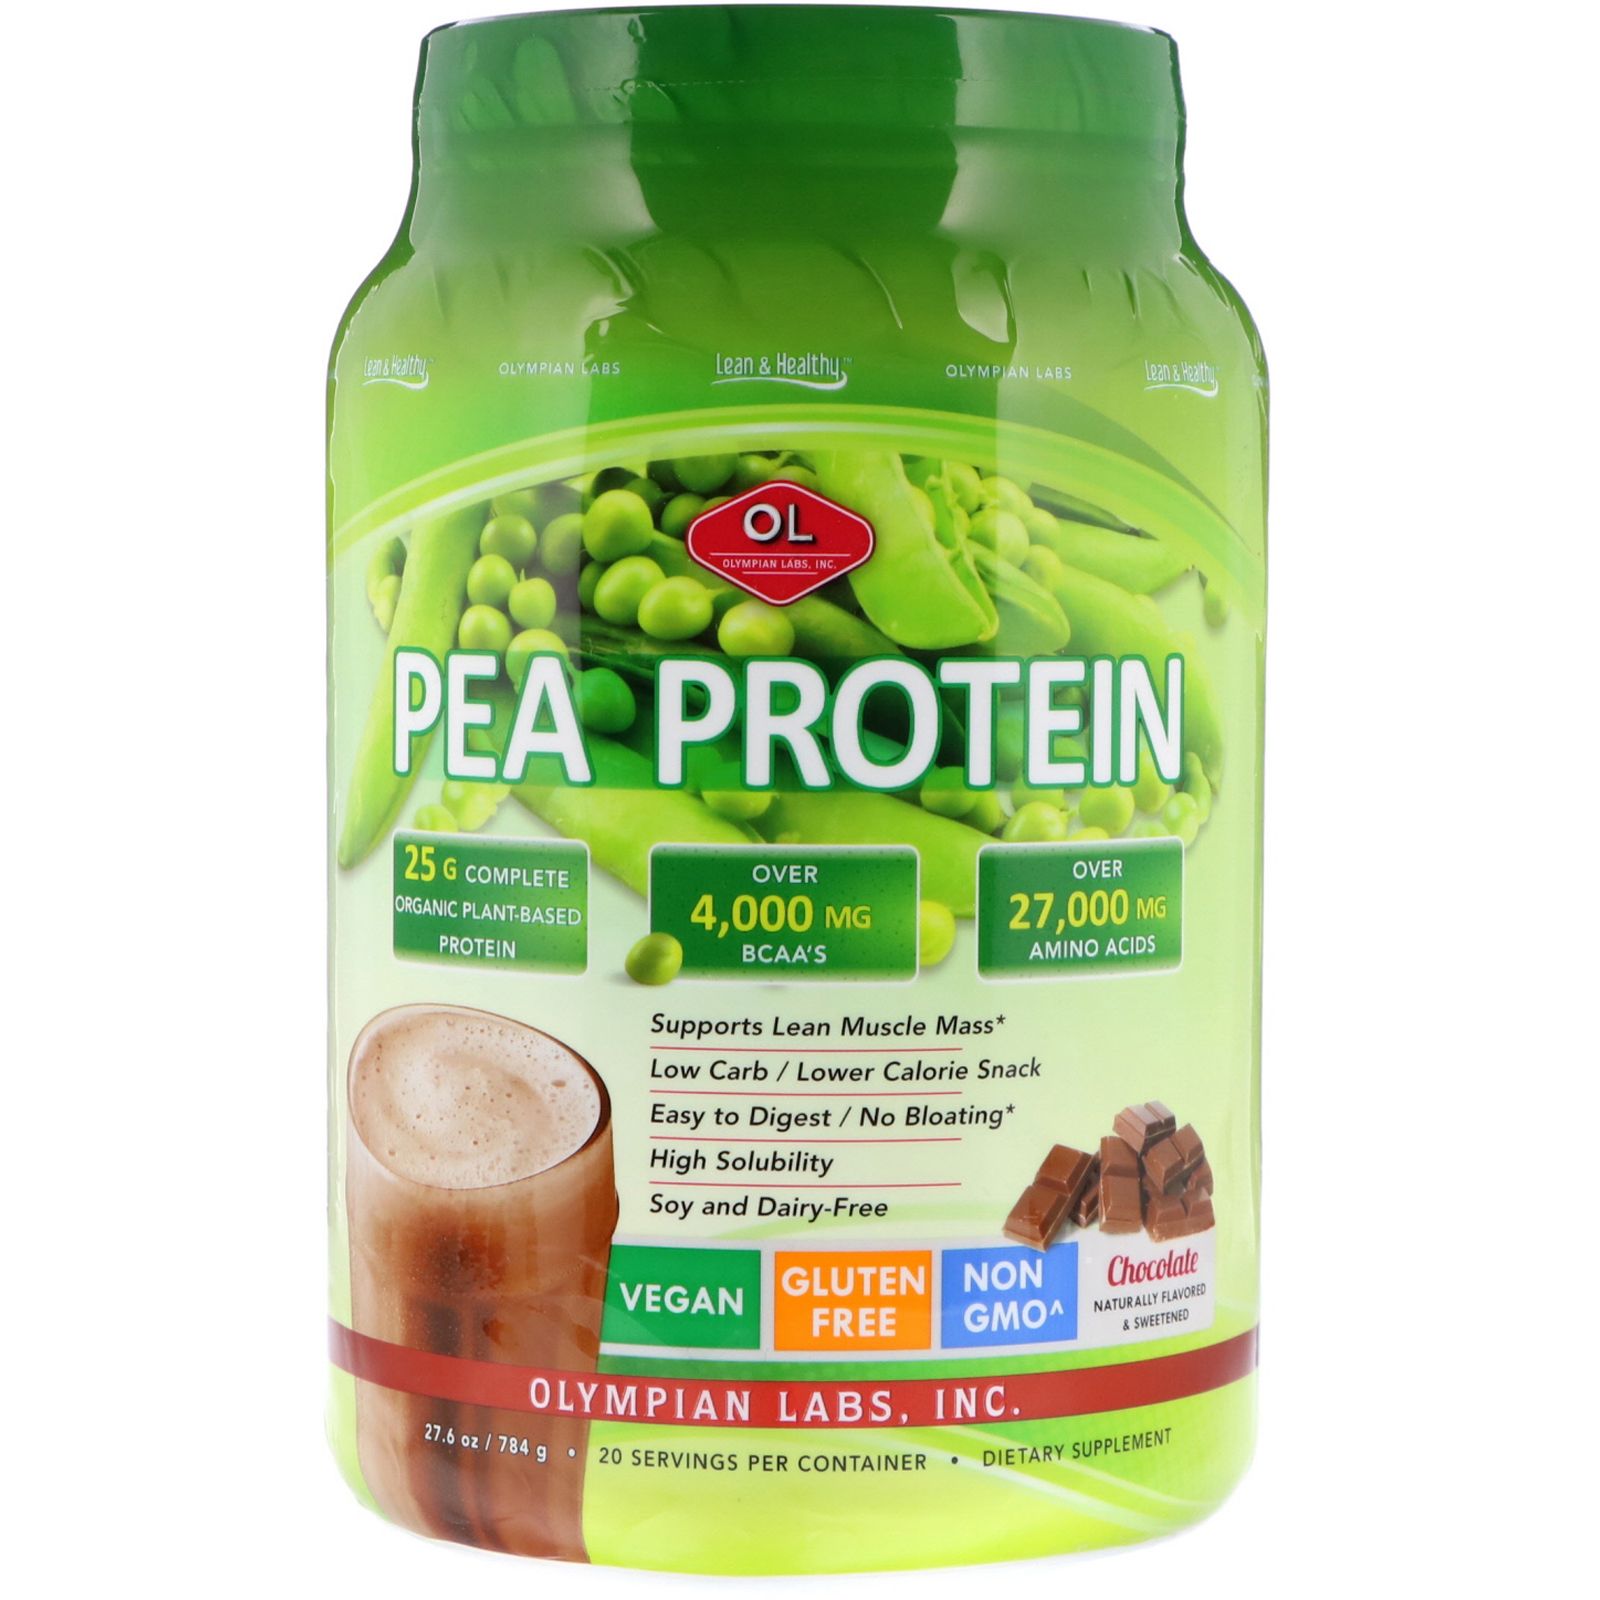 Olympian Labs Lean & Healthy Pea Protein Chocolate 27.6 oz (784 g)